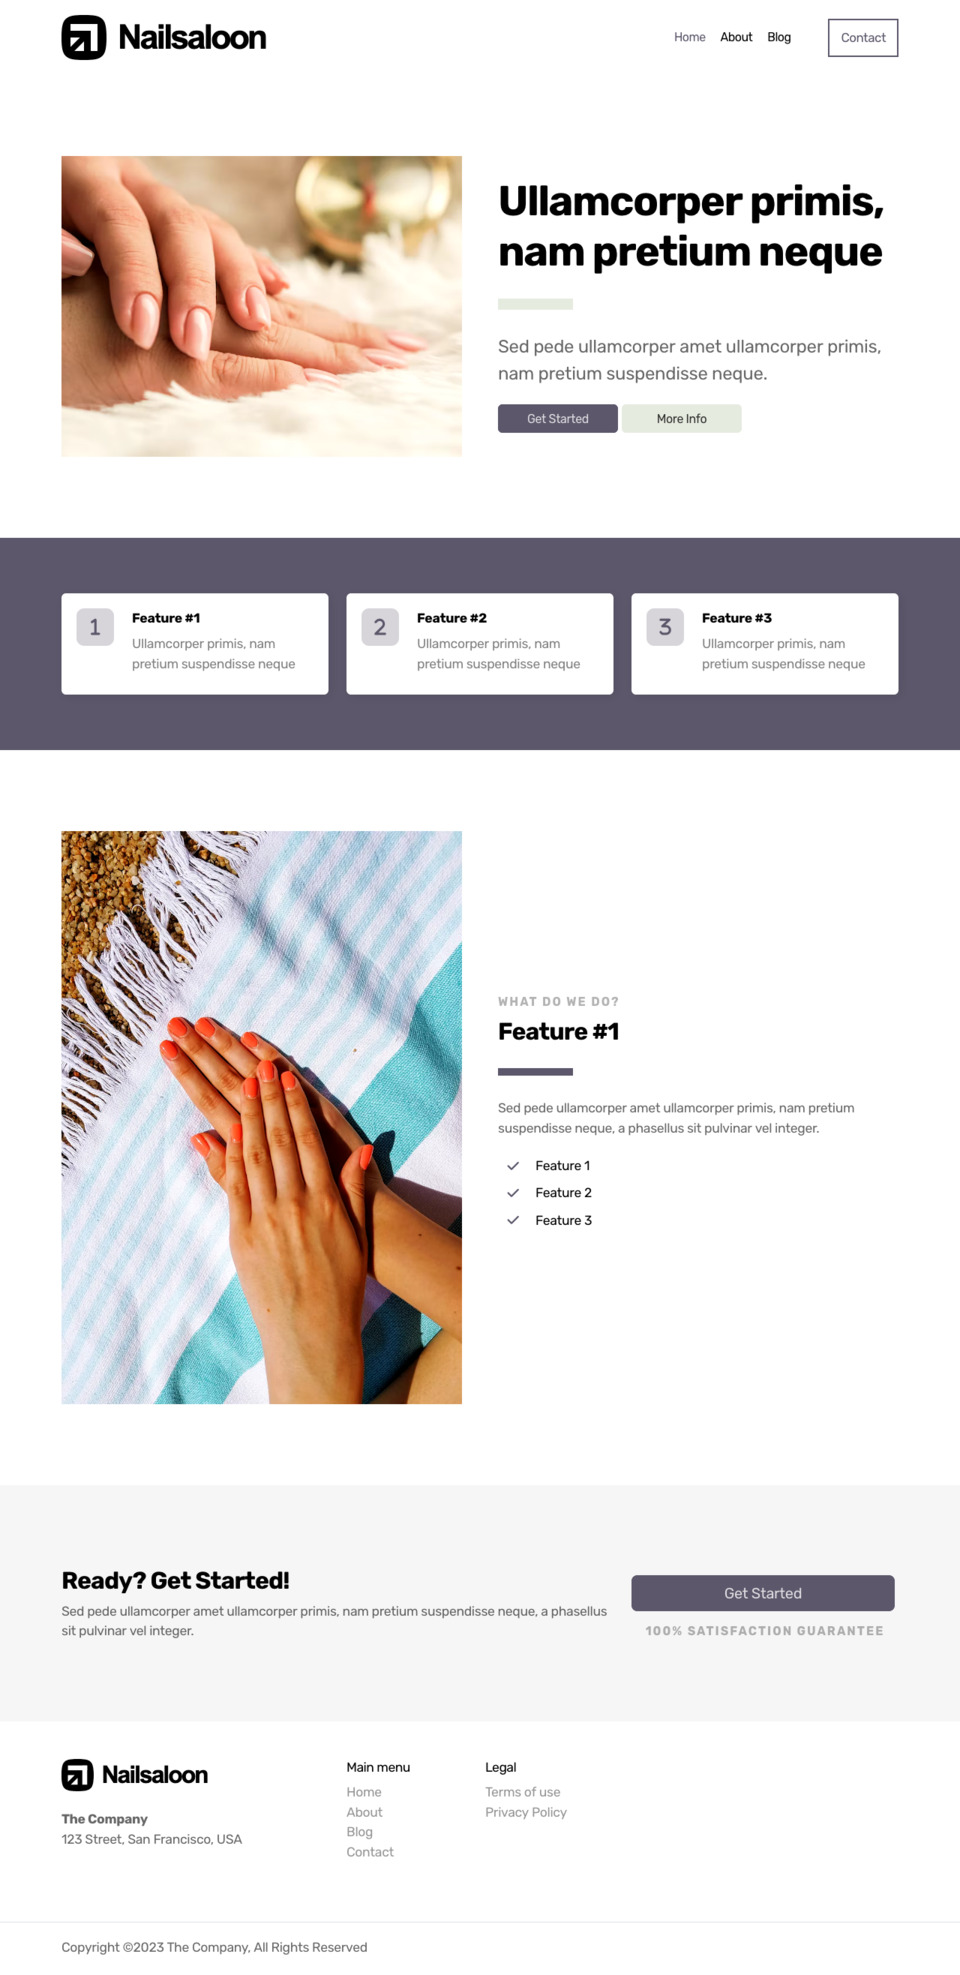 Nail Saloon Website Template - Ideal for nail salons, beauty businesses, spas, and anyone looking to create a stunning online presence for their services.